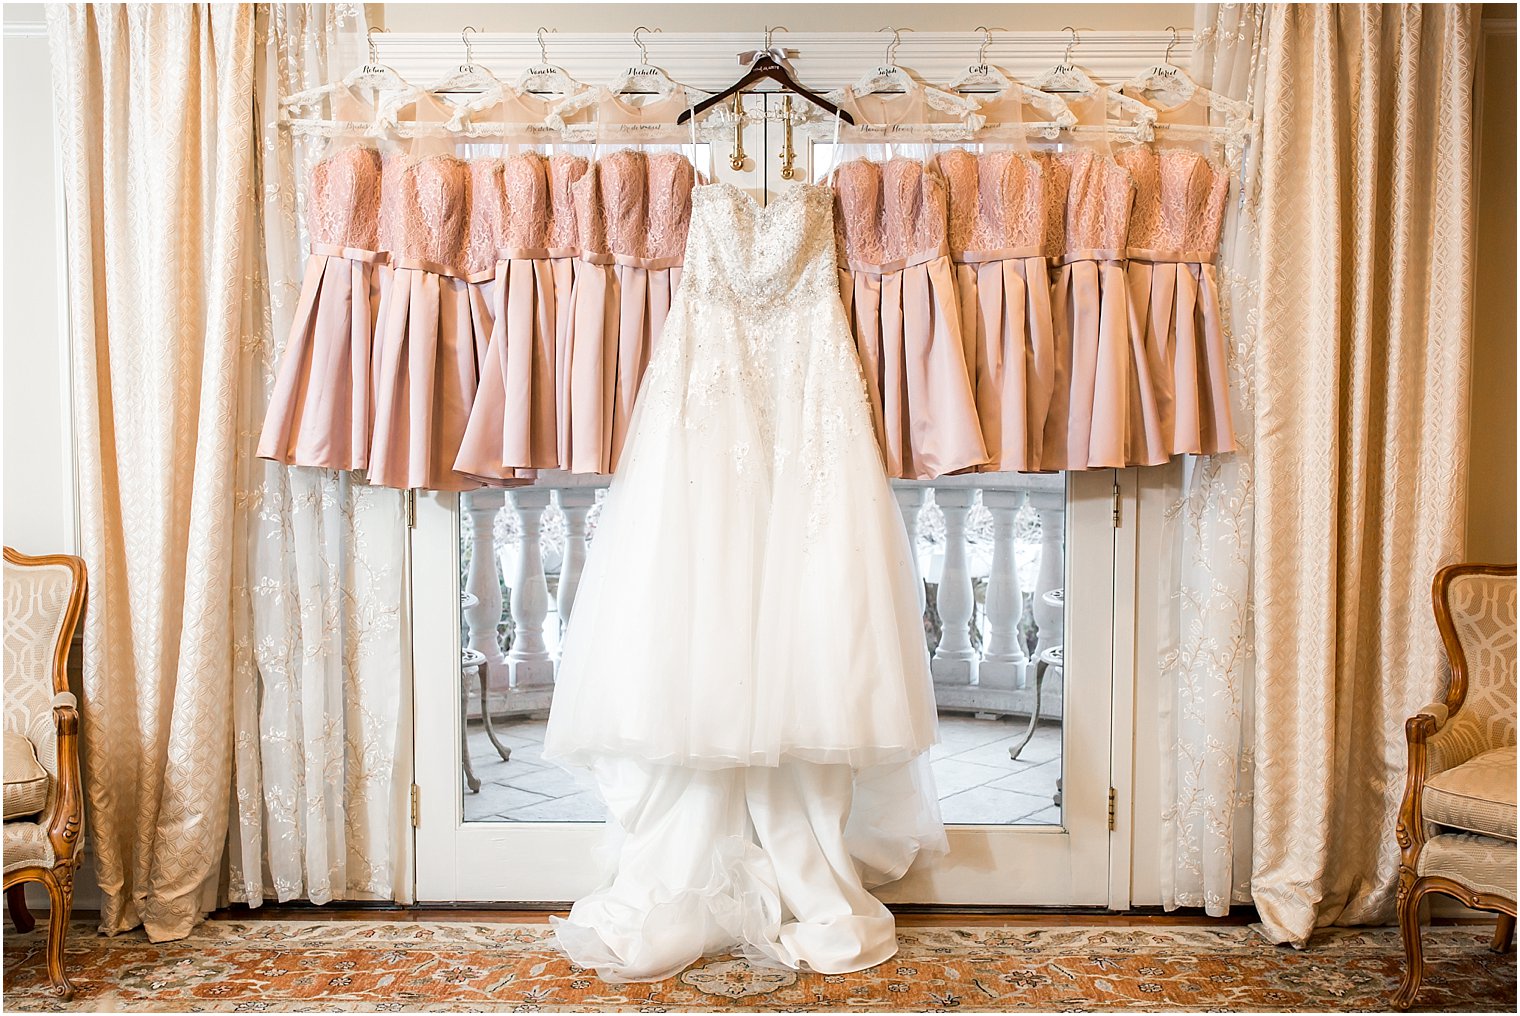 Wedding Dress from Bridal and Formal in Nanina's in the Park Bridal Suite | Photo by Idalia Photography